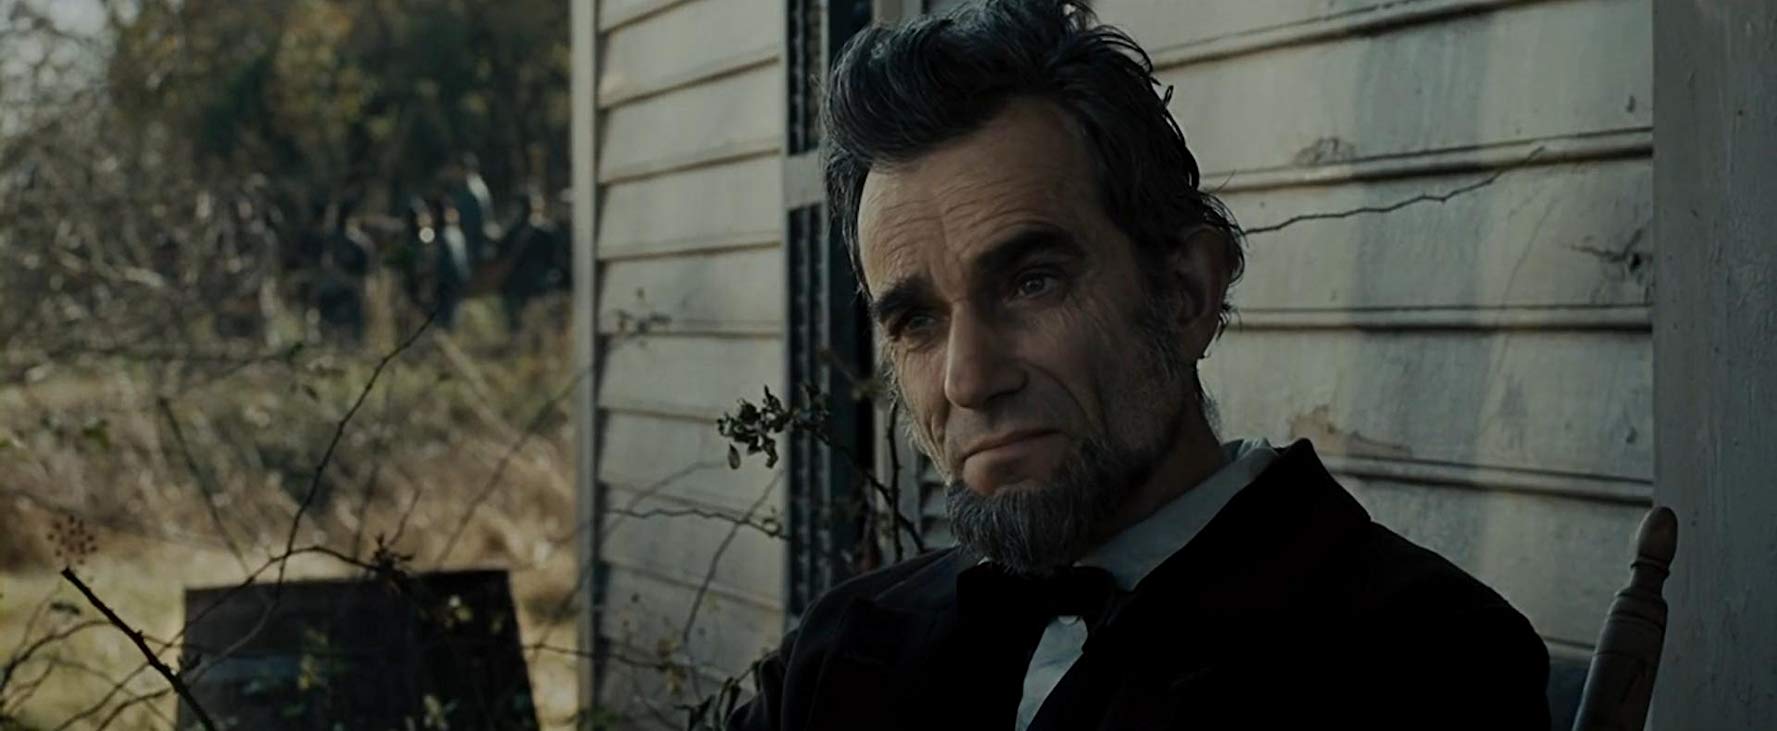 Daniel Day-Lewis as President Abraham Lincoln in Steven Spielberg's Lincoln. Best Films of 2012